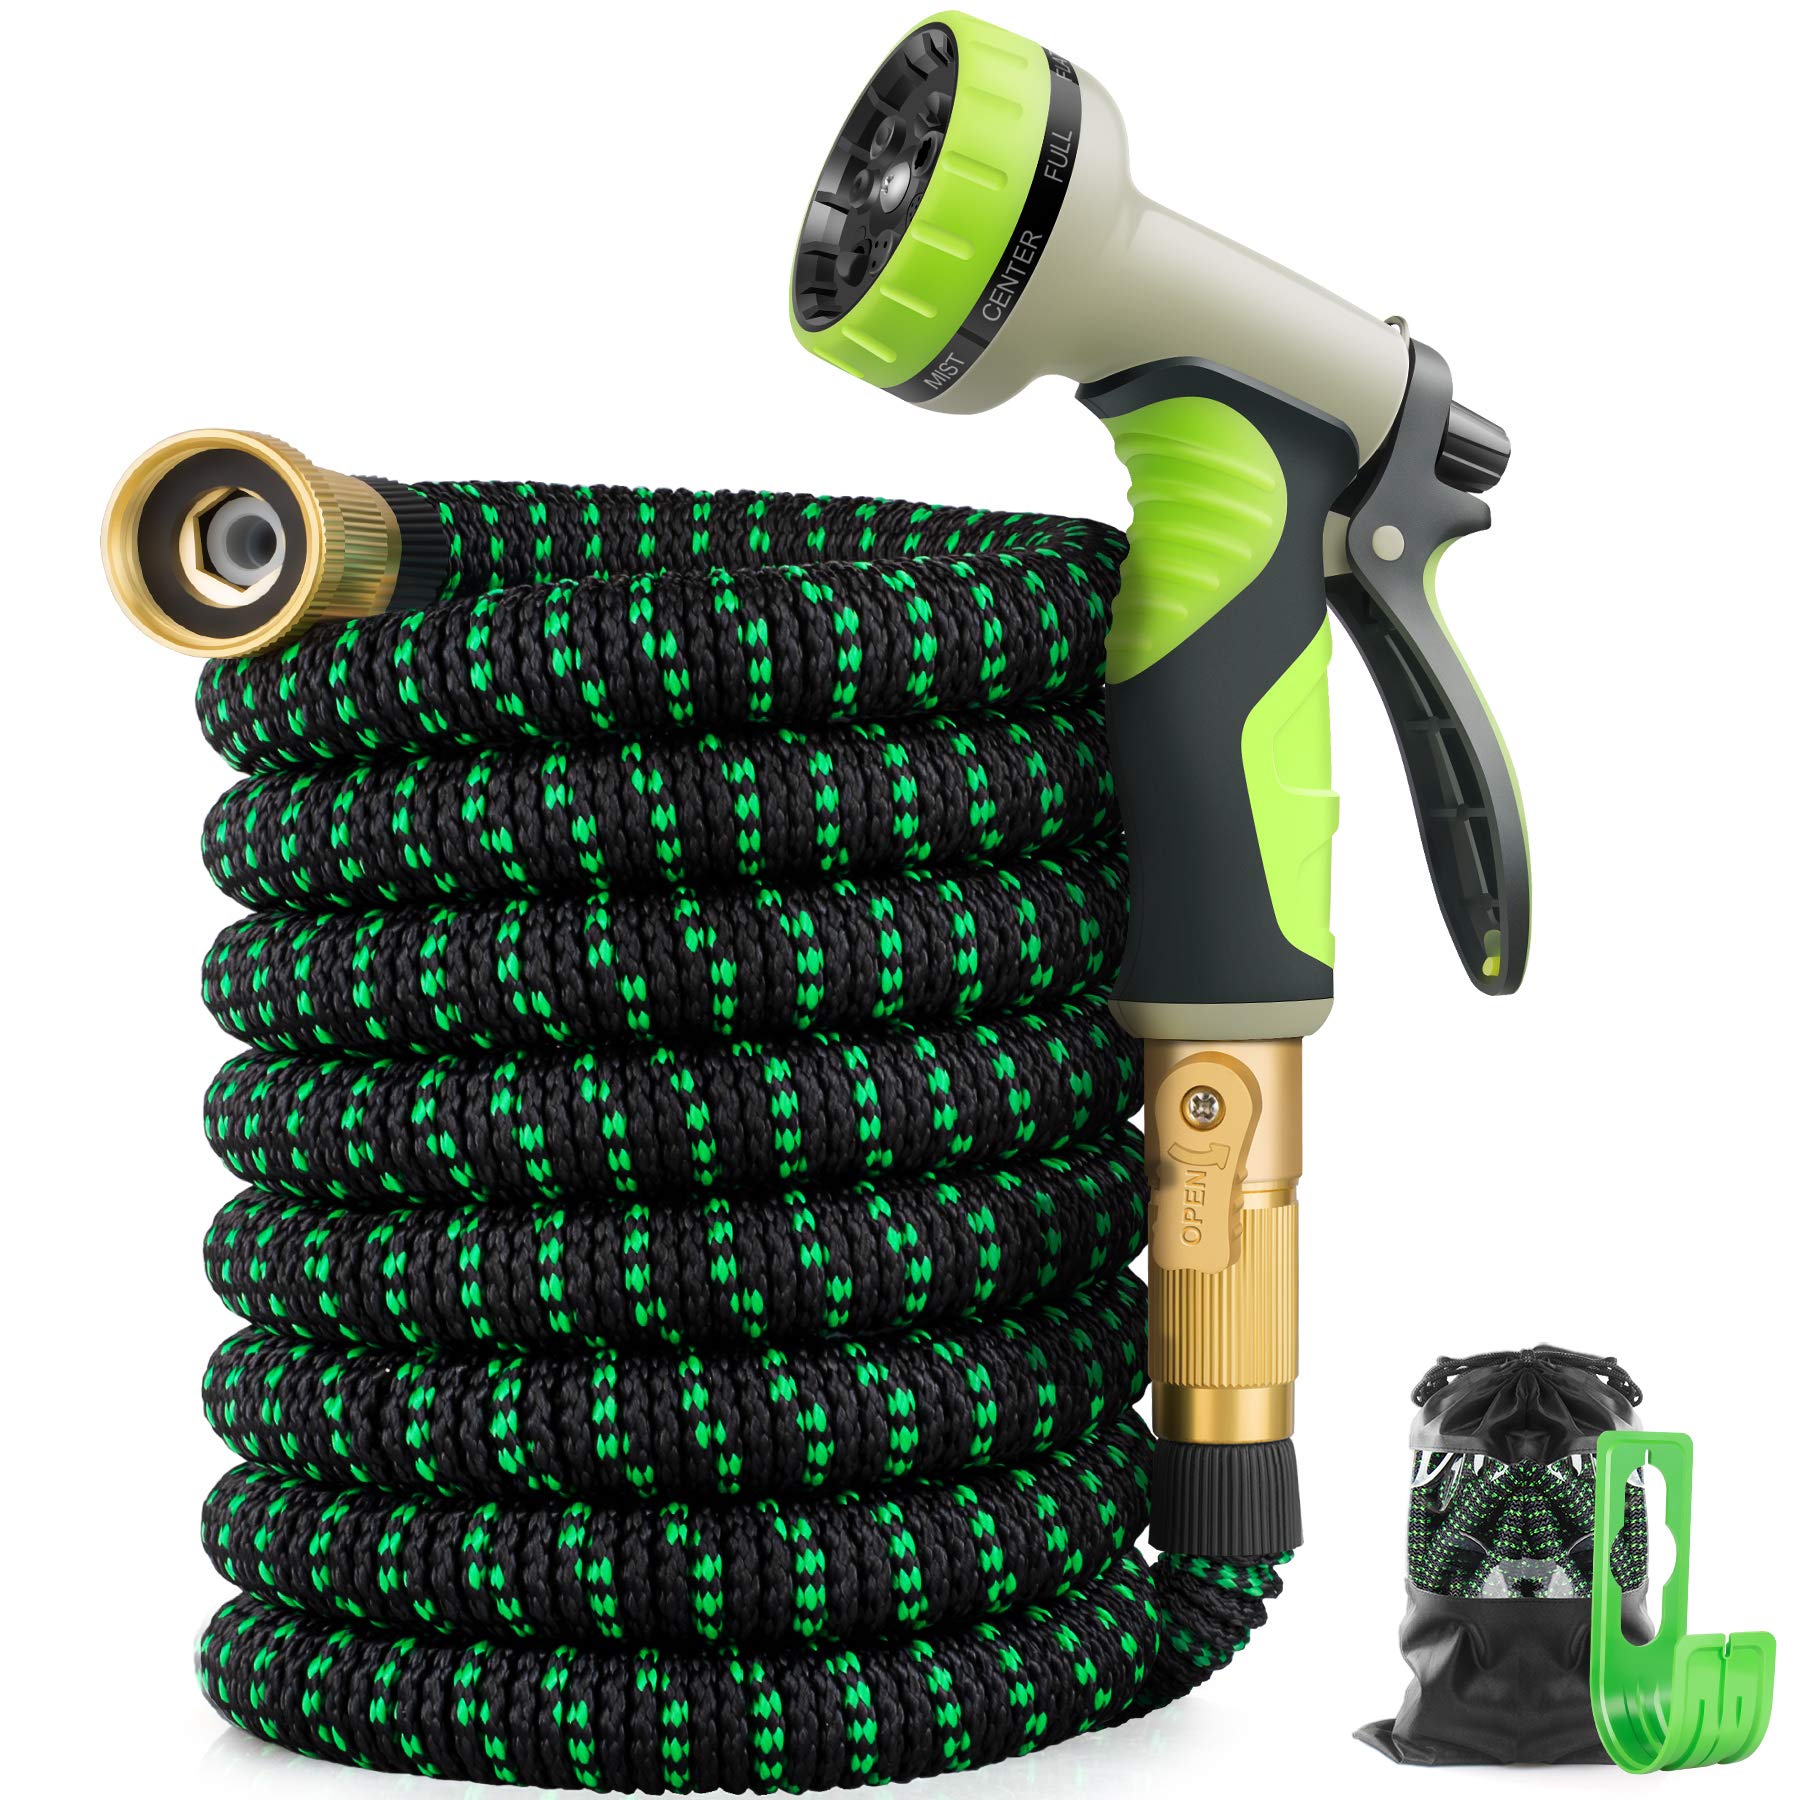 Flexible Expandable Garden Hose Stretch Hosepipe with 7 Pattern Spray Nozzle 